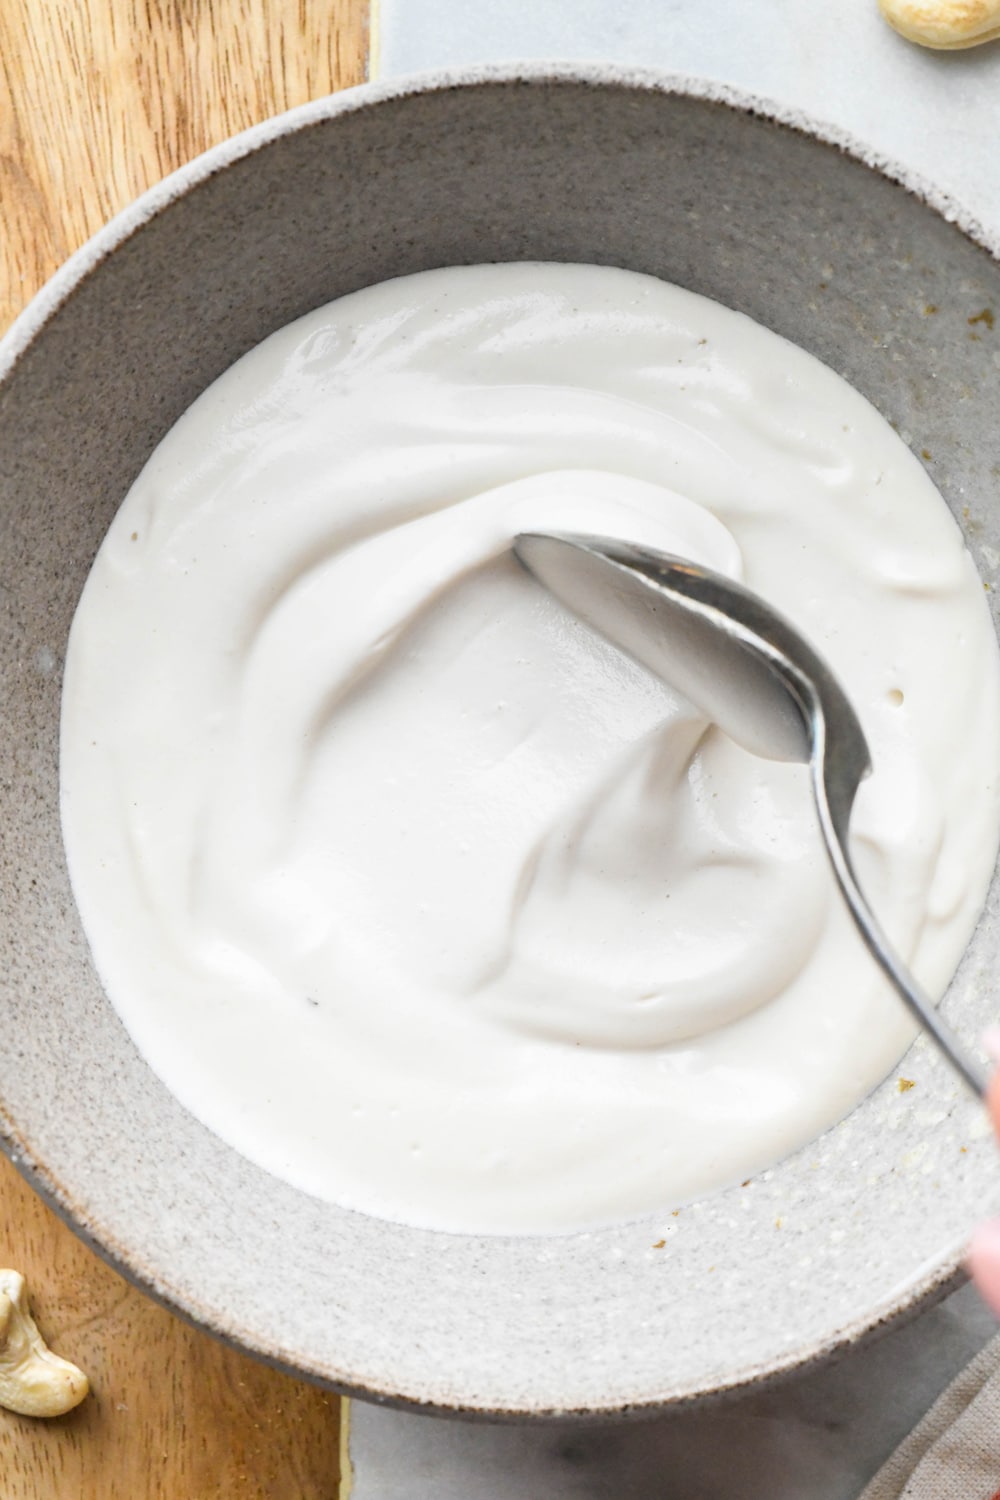 Cashew cream made with 1/2 cup of water in a grey ceramic bowl with a spoon stirring the cream to show the texture.